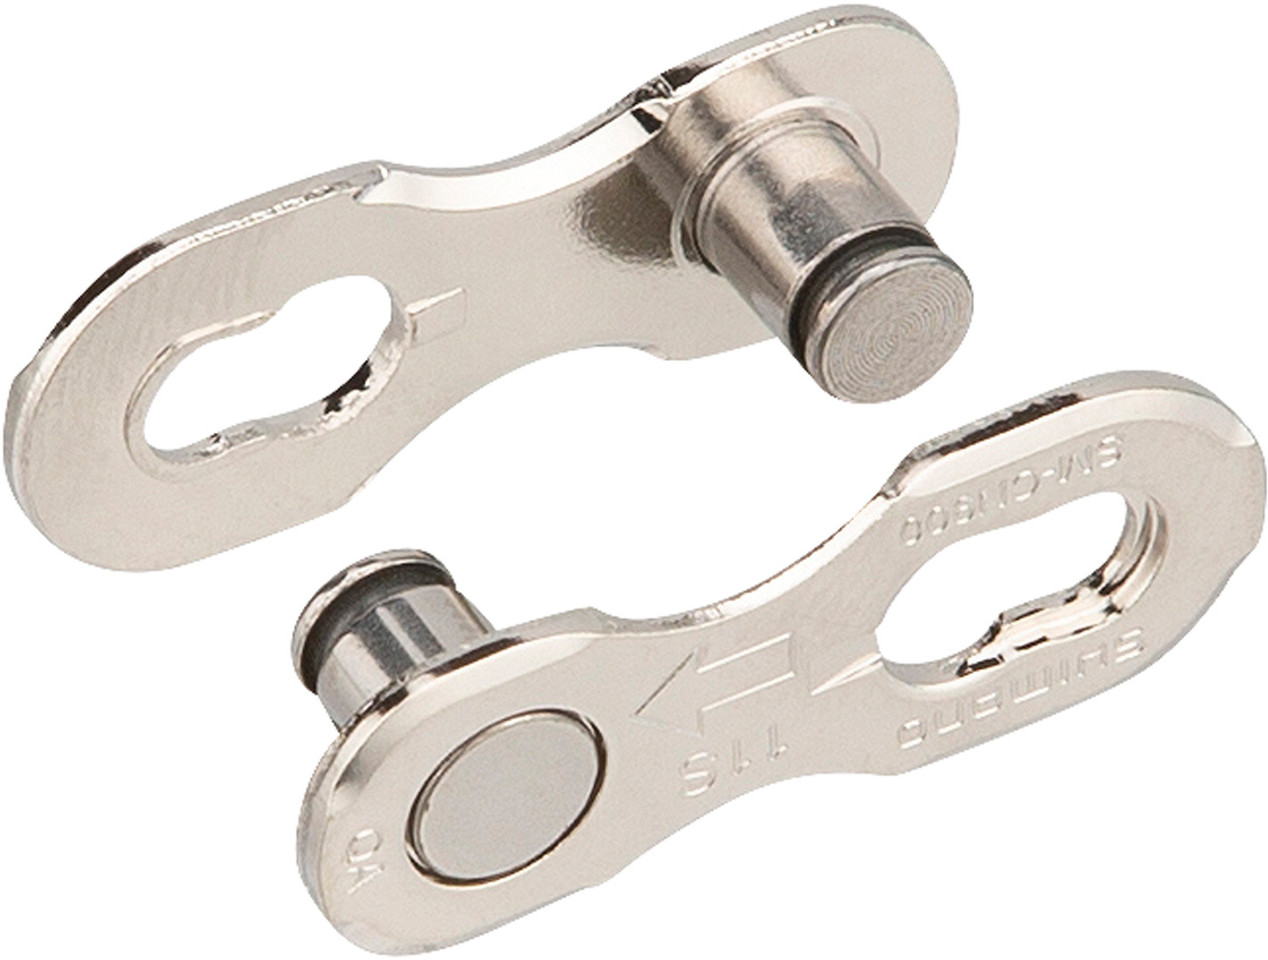 SHIMANO SM-CN900-11 QUICK LINK MASTER LINK FOR 11-SPEED BICYCLE CHAIN-2 LINKS 